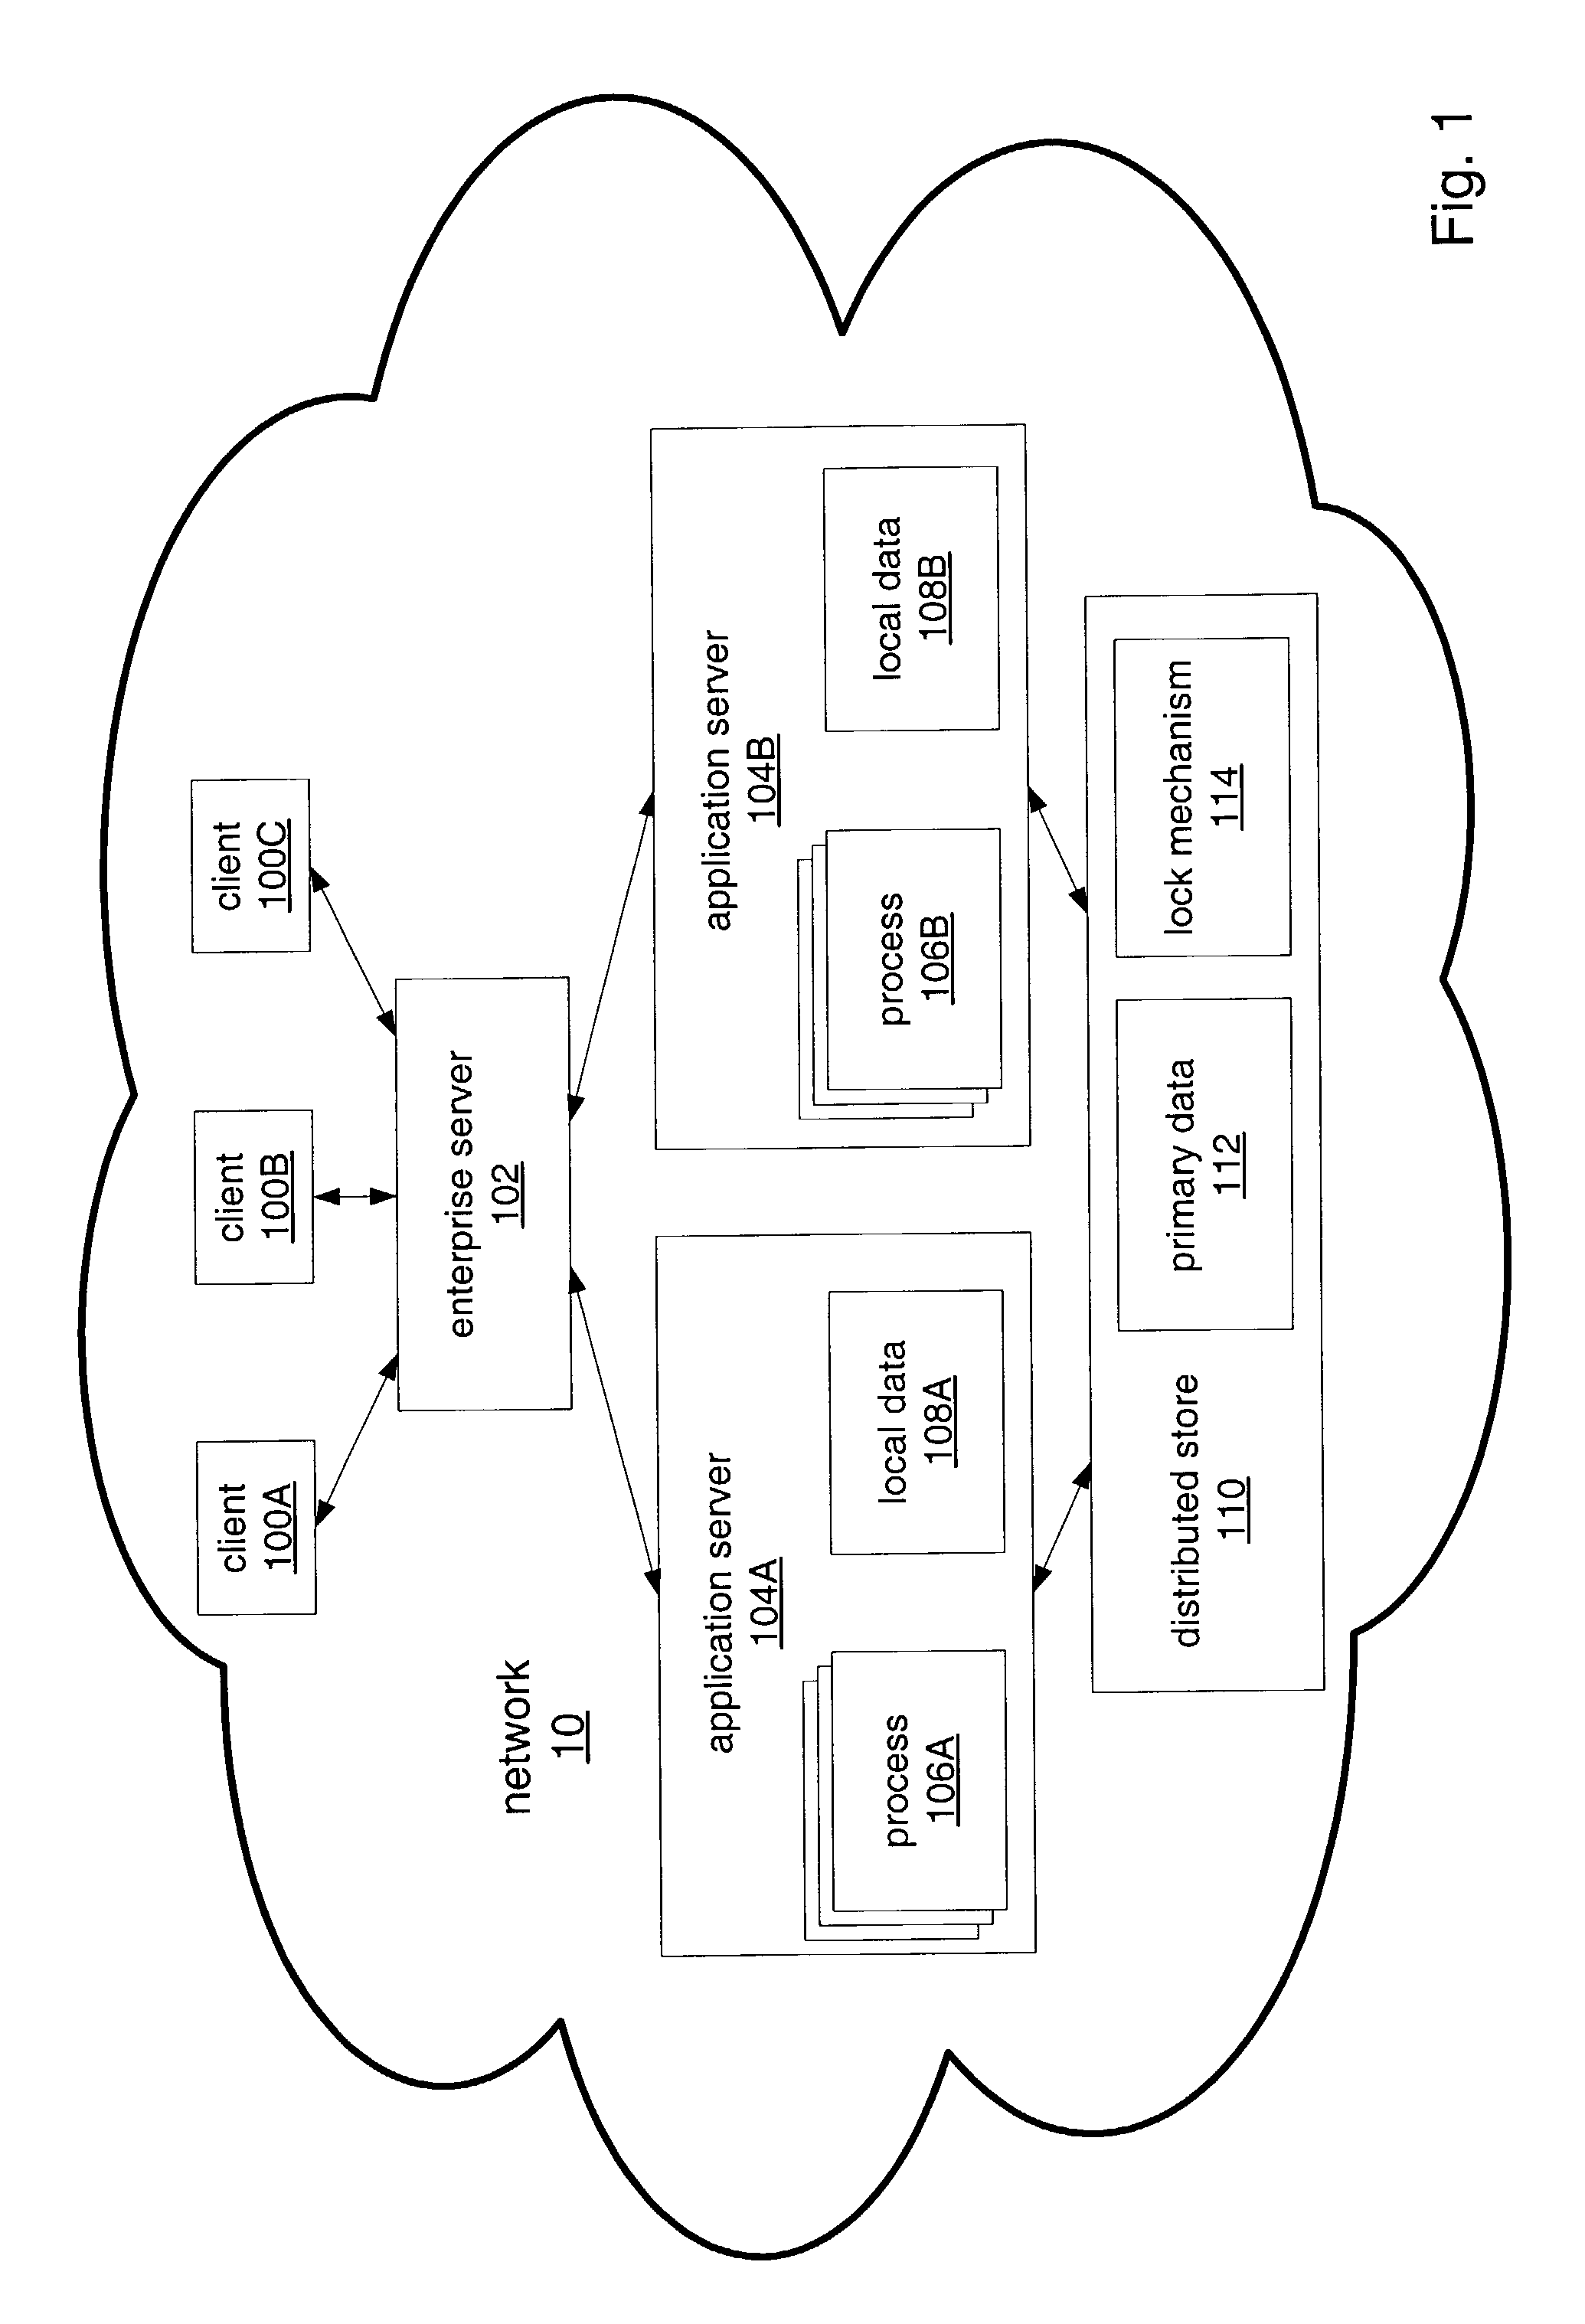 Lock holding multi-threaded processes for distibuted data systems